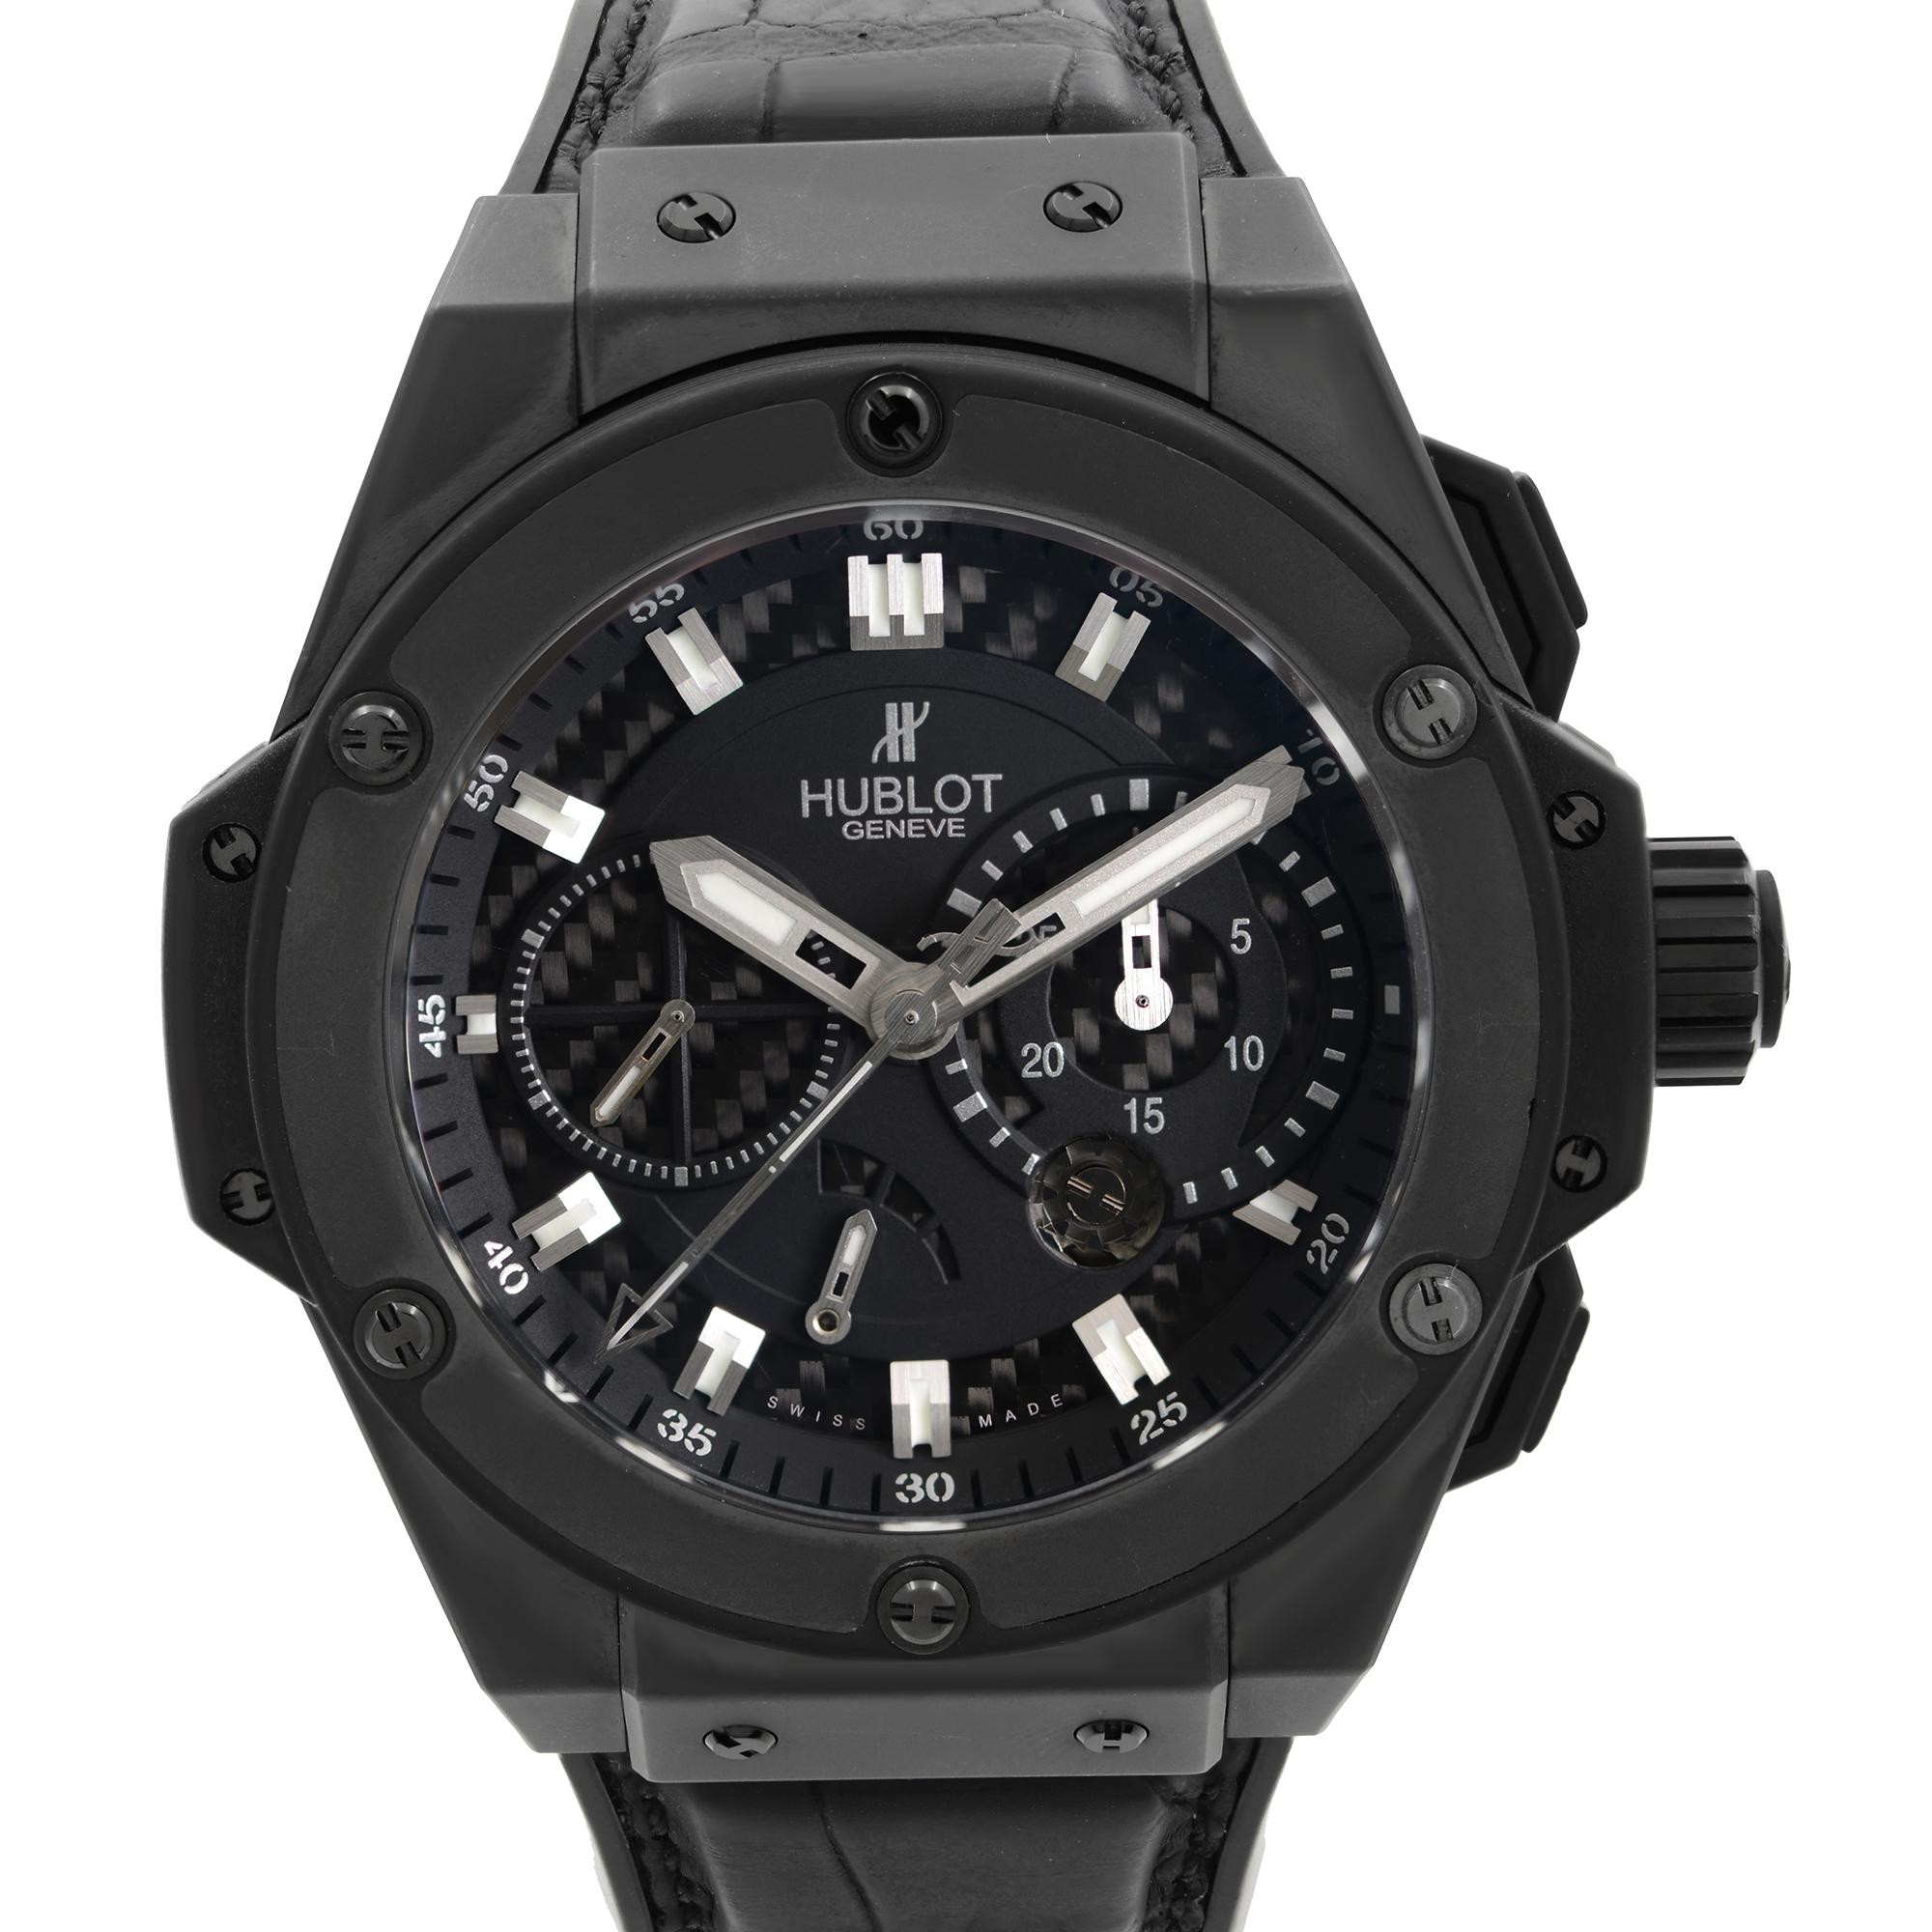 Pre Owned Hublot Big Bang King Power 48mm Ceramic Double Split Seconds Chronograph Carbon Fiber Black Dial Automatic Mens Watch 709.CI.1770.RX. This Beautiful Timepiece is Powered by Mechanical (Automatic) Movement And Features: Round Black Ceramic